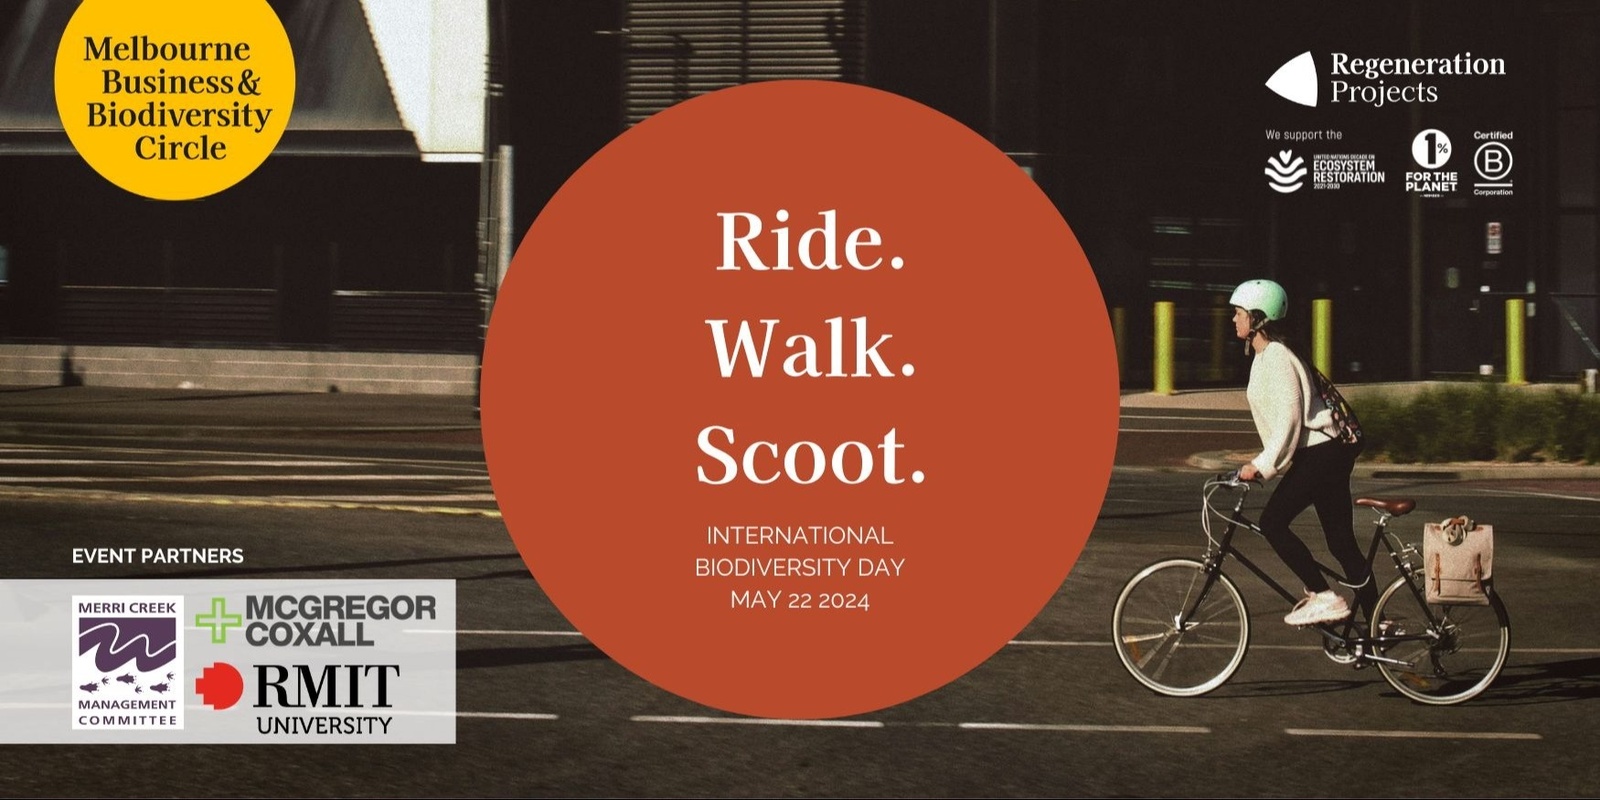 Banner image for Ride . Walk . Scoot - Exploring the connections between workplace wellbeing, urban design & biodiversity